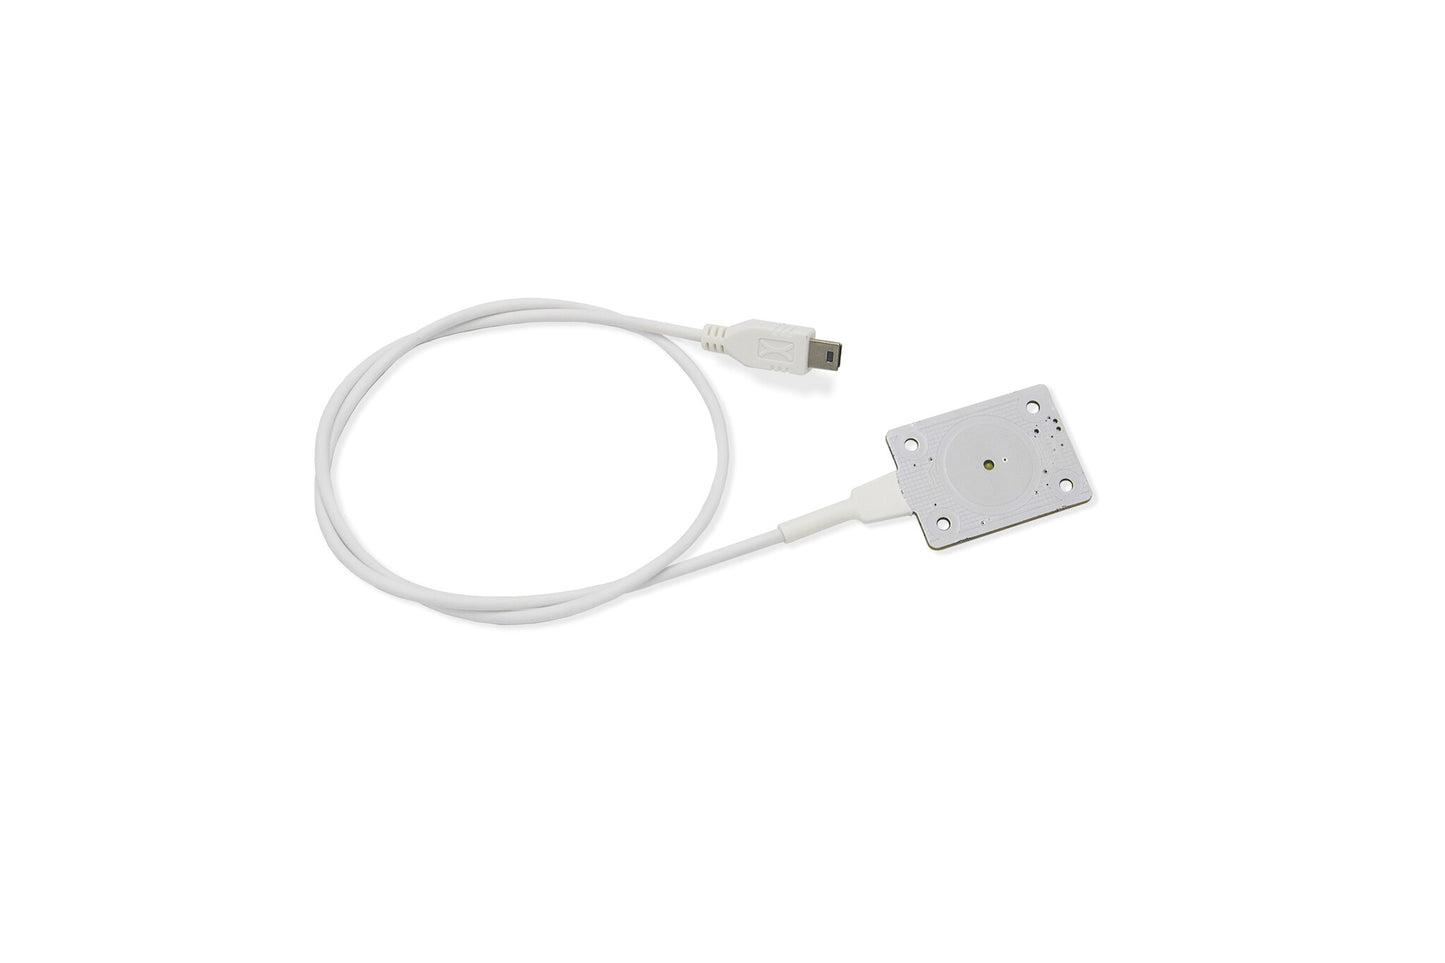 Nexmosphere X-Touch, 1 large button, Rectangular, White LED, 180cm cable